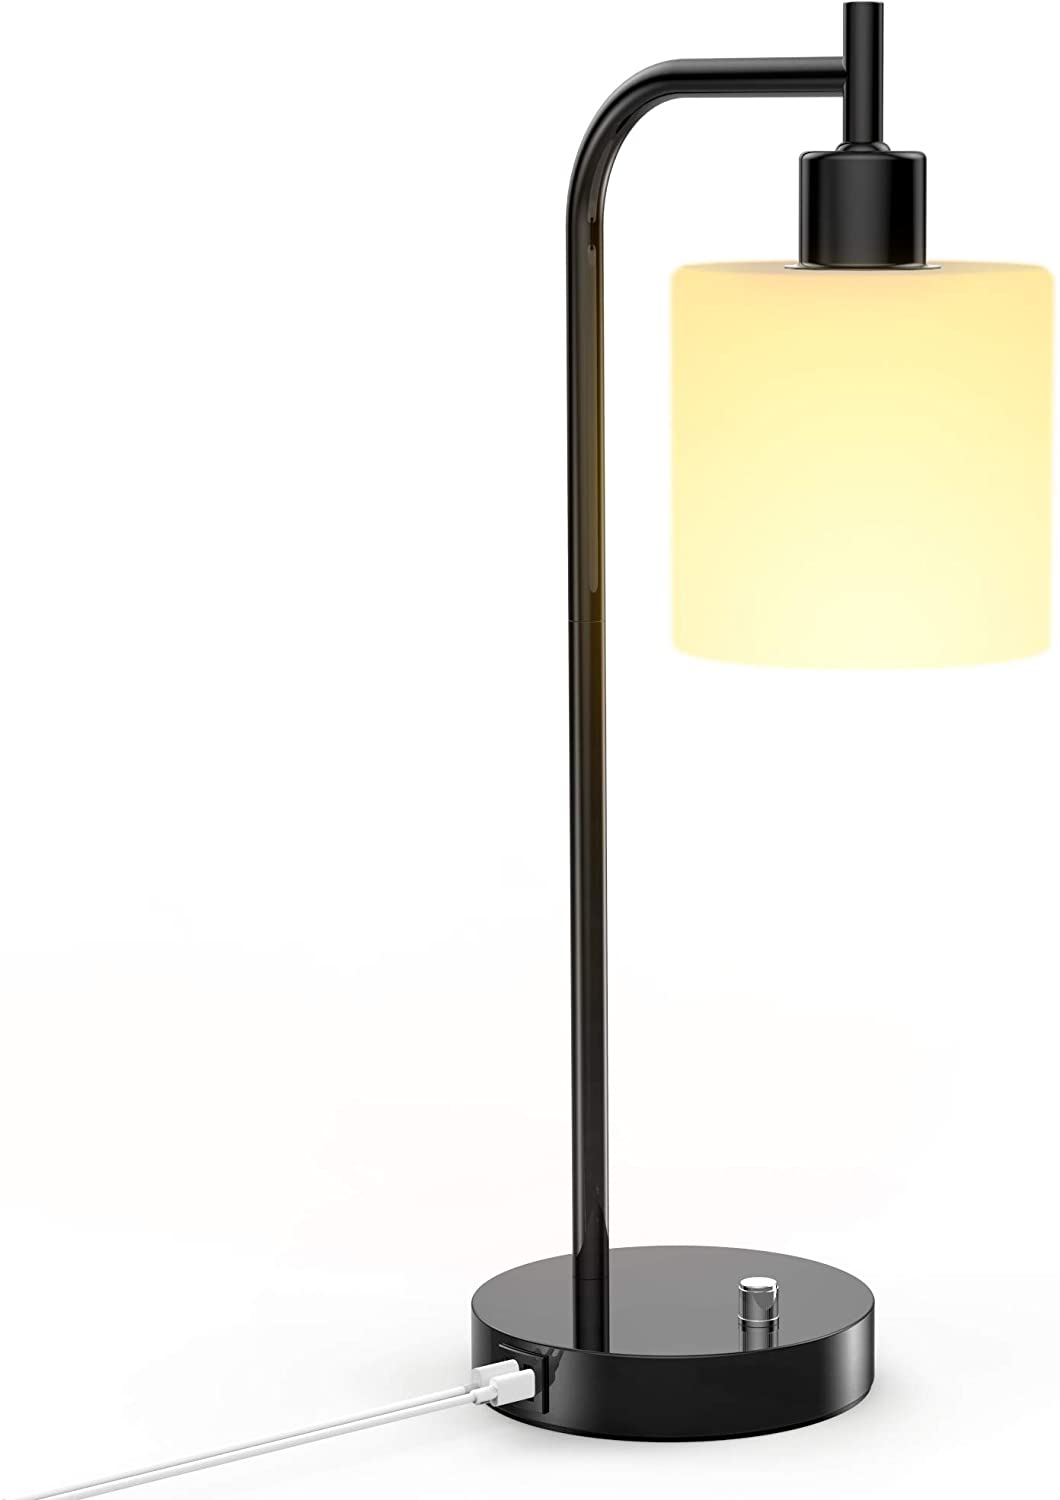 Table Lamp, Industrial Table Lamp with White Jade Glass Shade, LED Bulb Included, with Dimmable Function, Type C USB Port ,Nightstand Reading Lamps for Bedside, Study Room, Office (Matt Black)